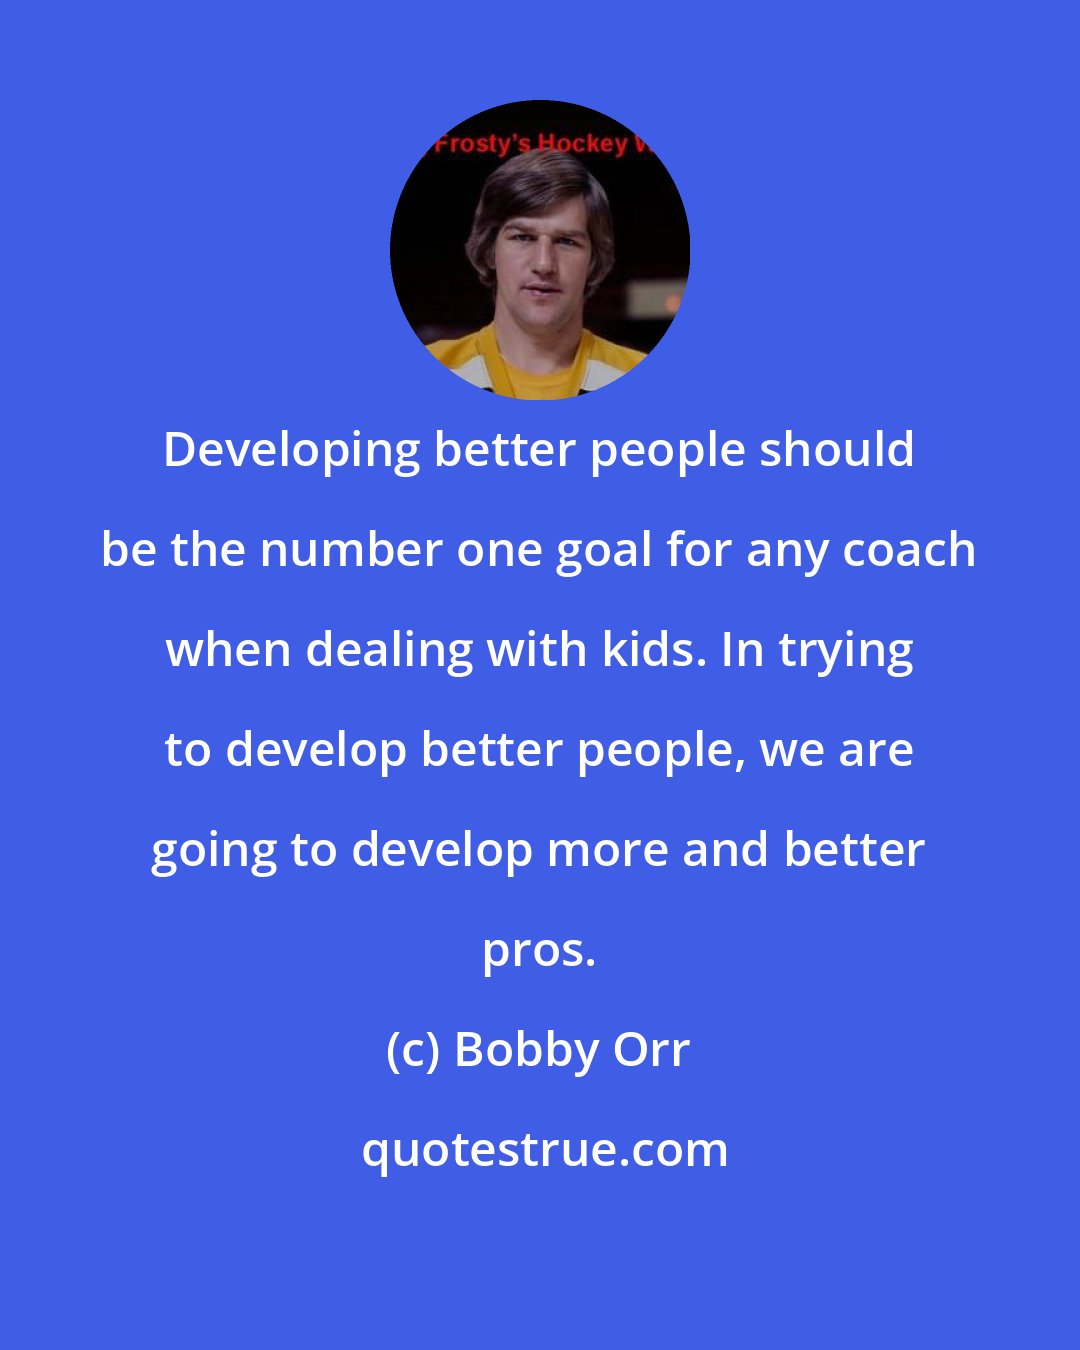 Bobby Orr: Developing better people should be the number one goal for any coach when dealing with kids. In trying to develop better people, we are going to develop more and better pros.